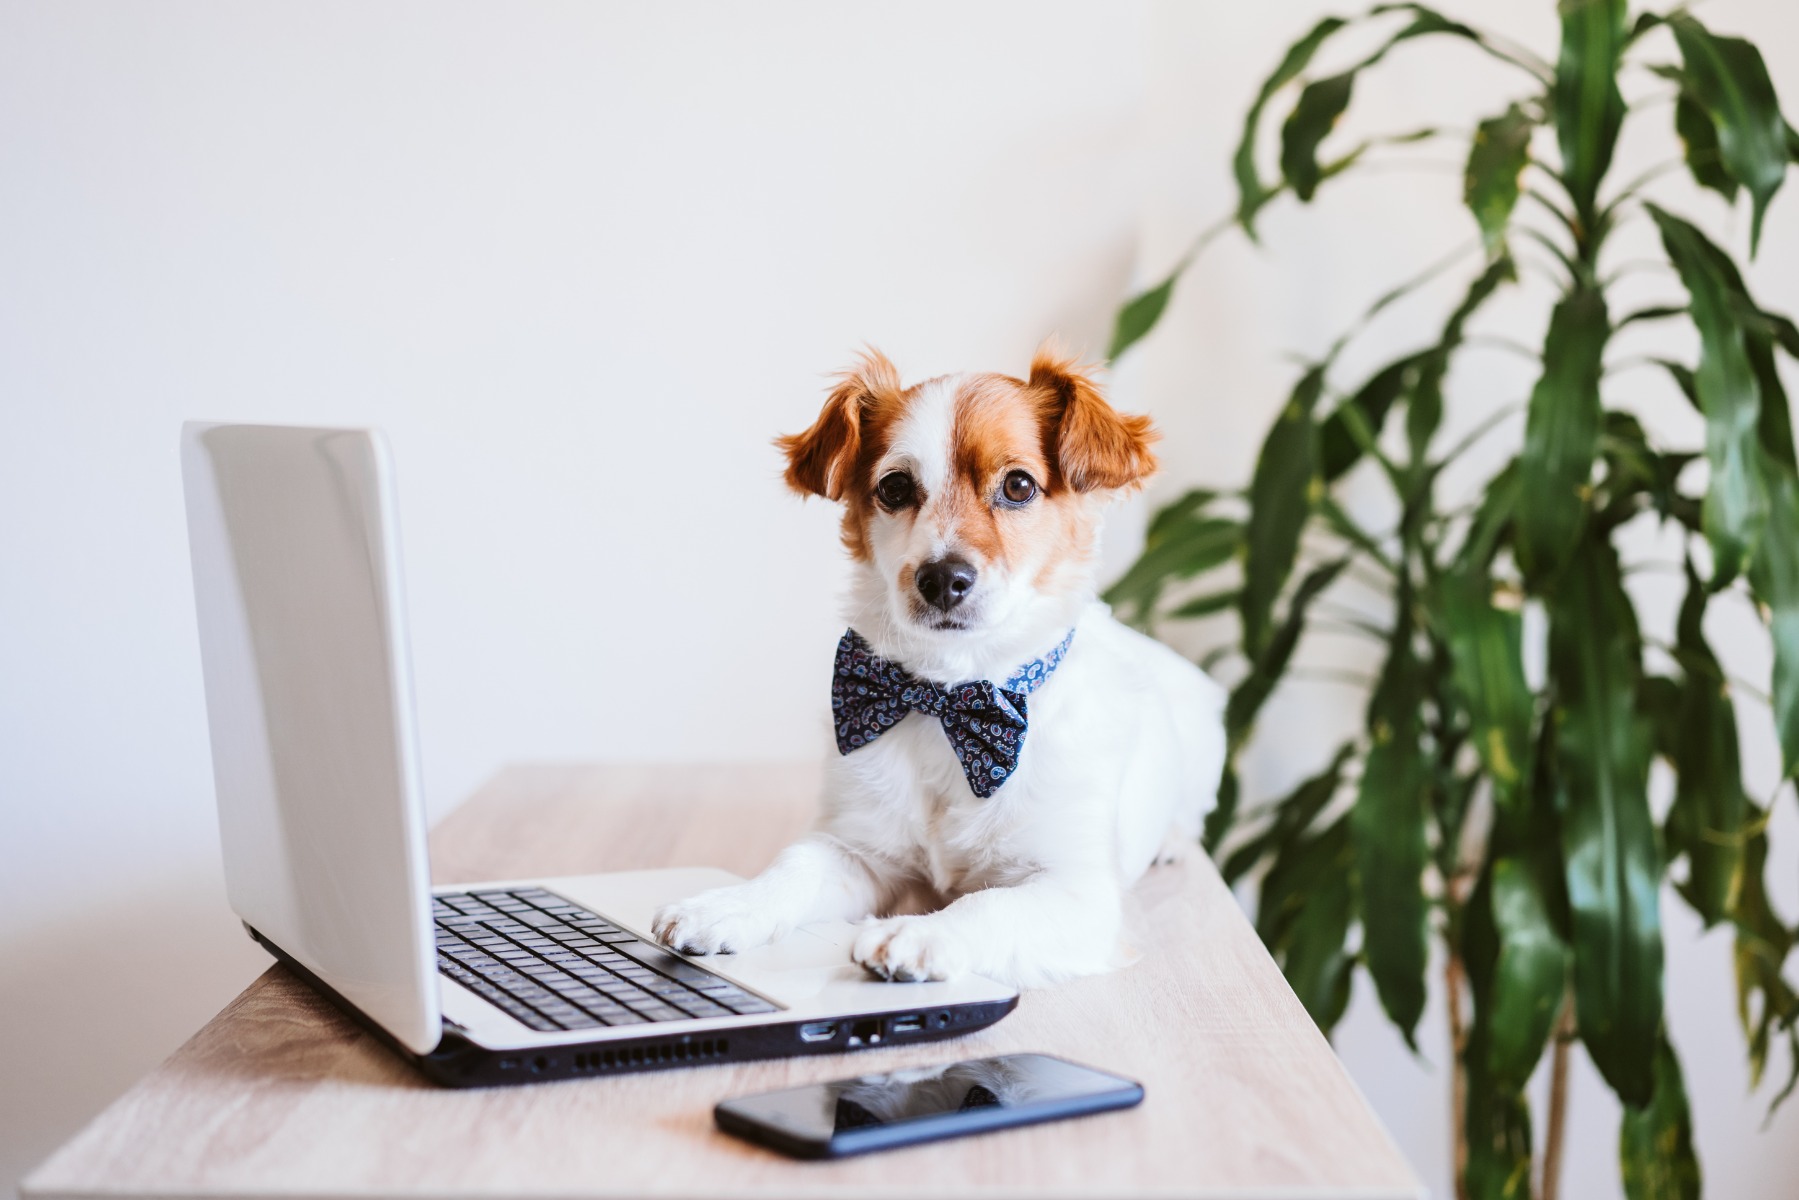 Dog working with laptop and phone as a nutritional advisor